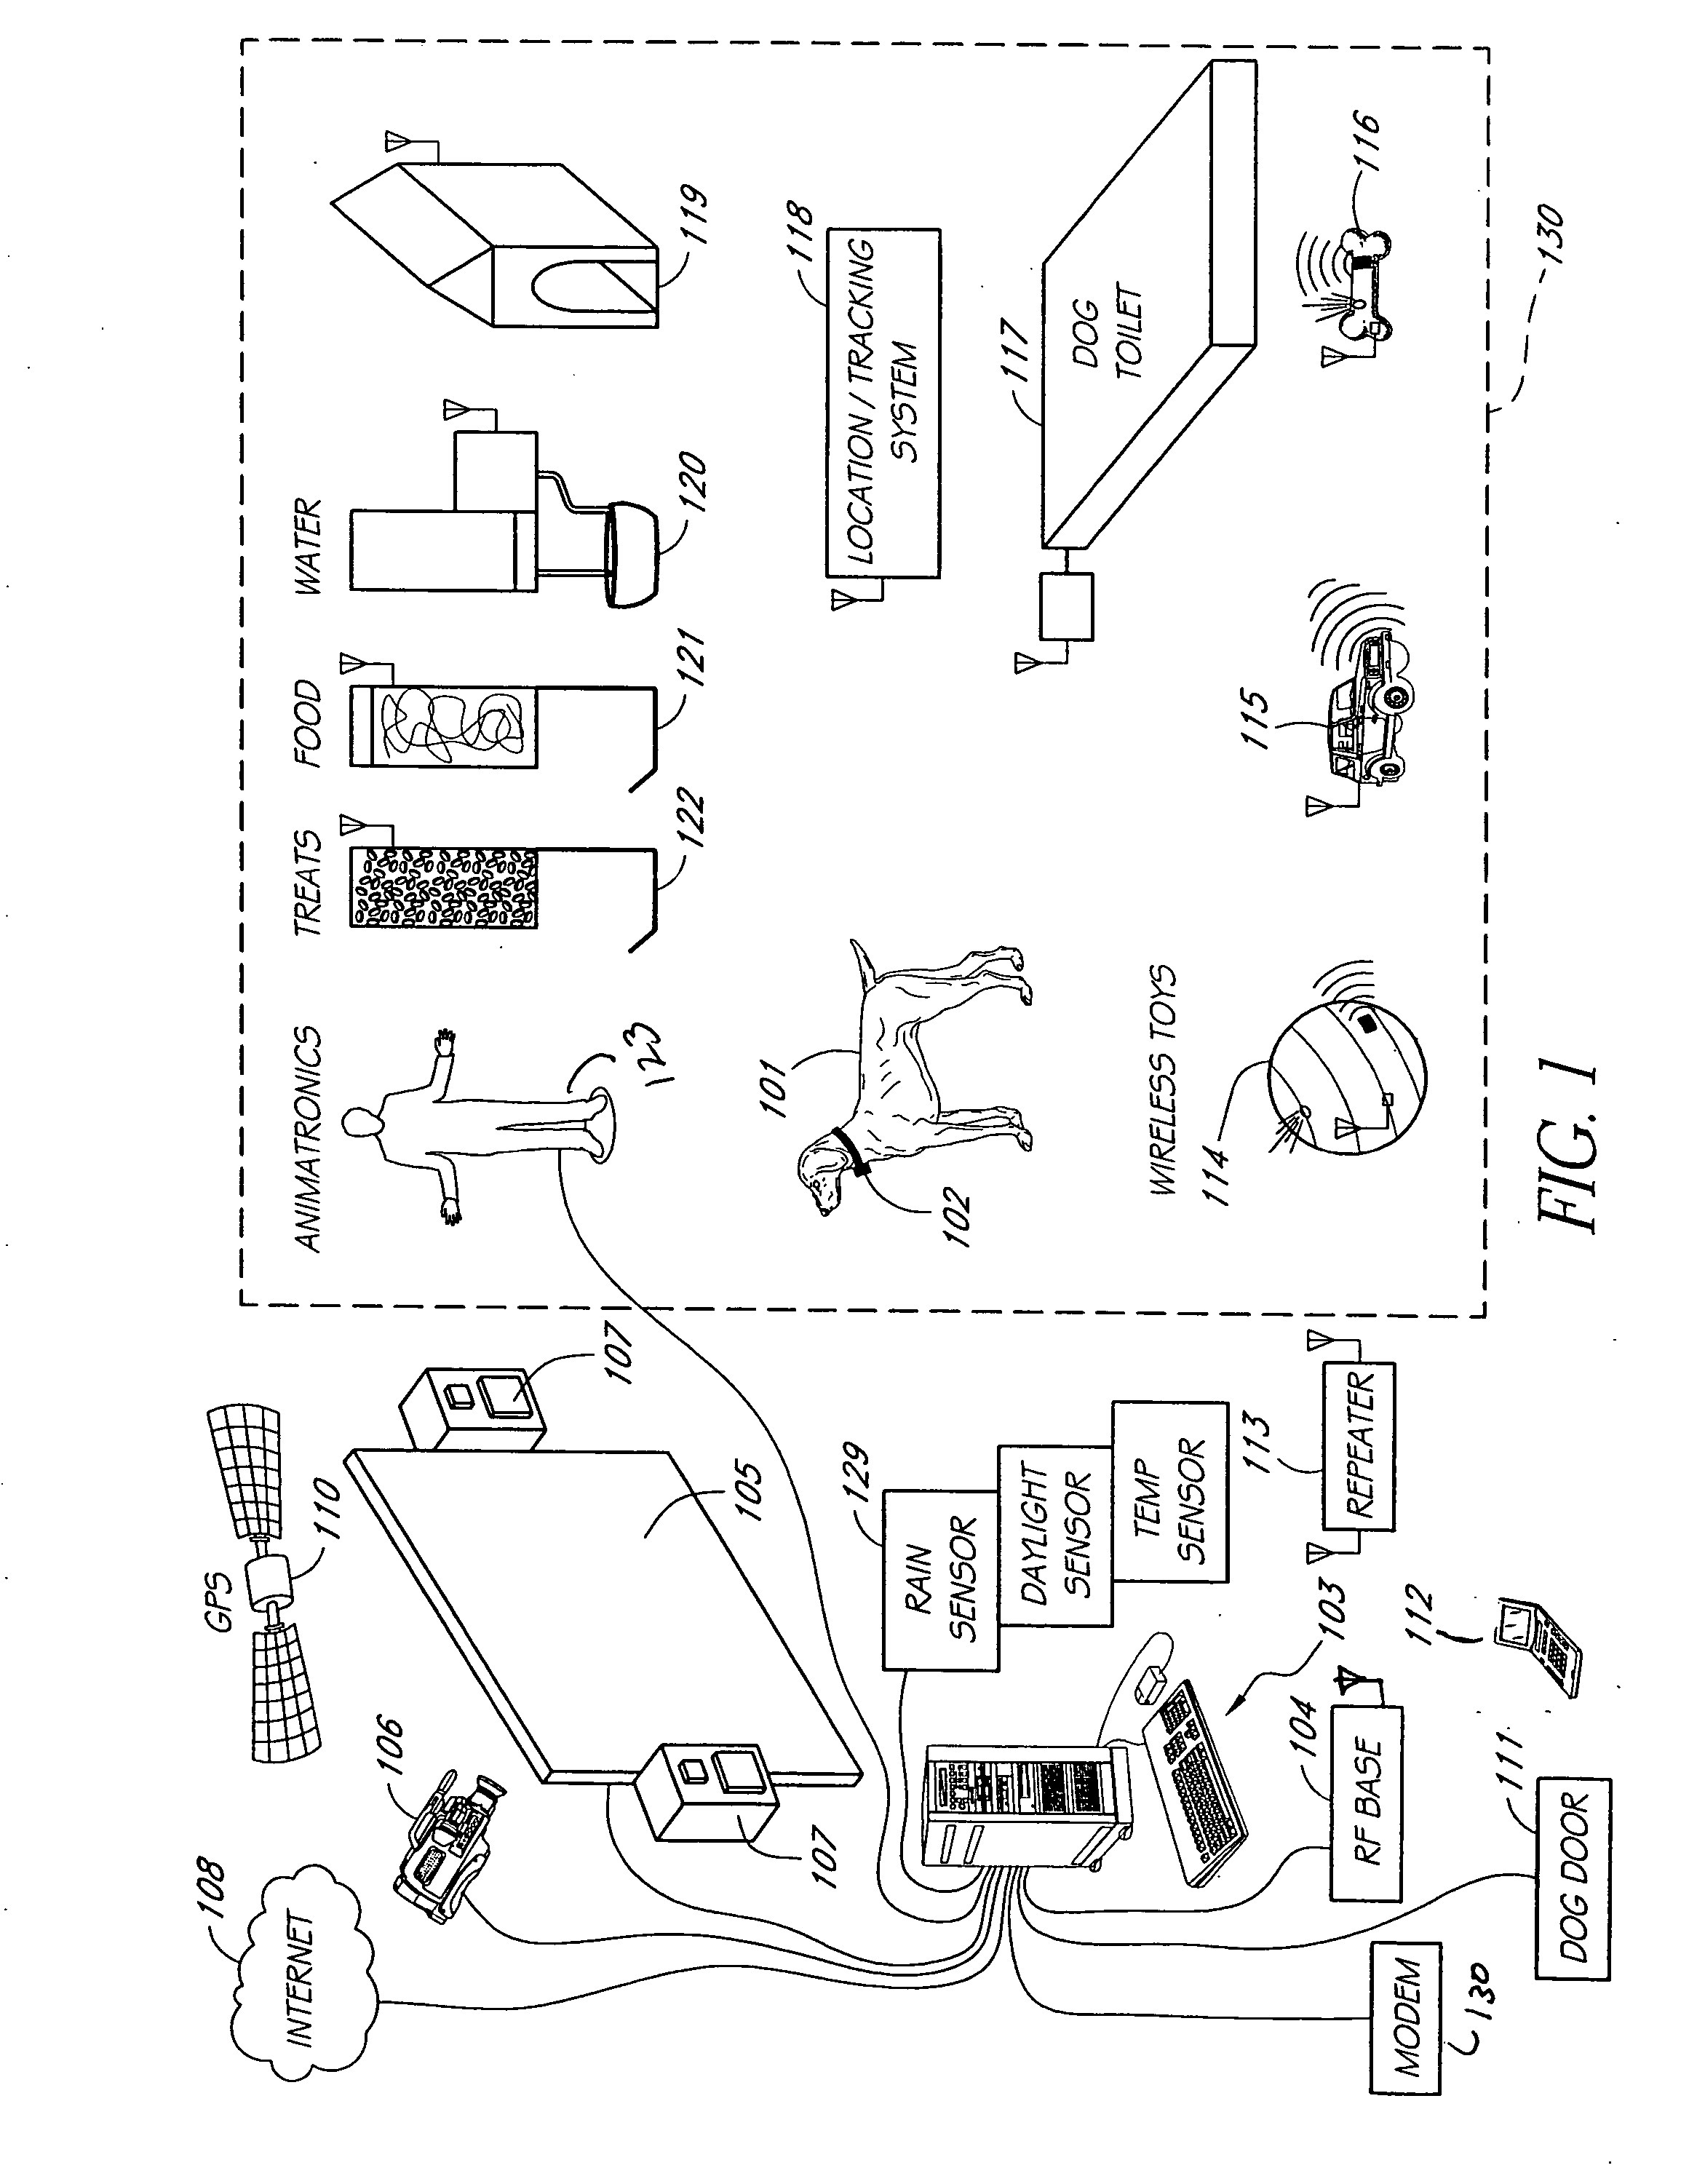 System and method for computer-controlled animal toy